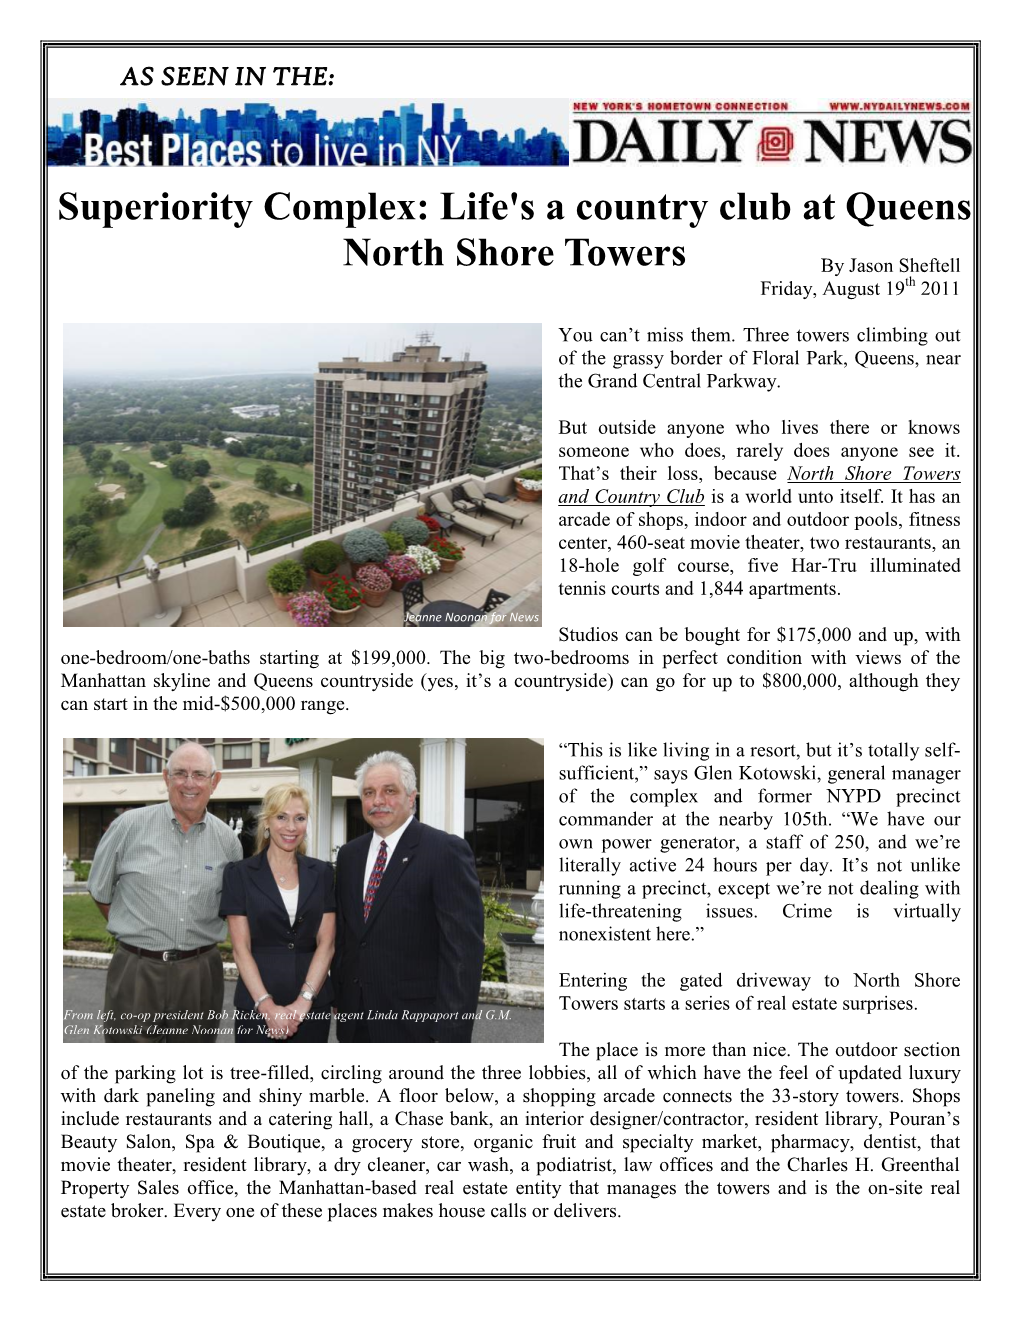 Superiority Complex: Life's a Country Club at Queens North Shore Towers